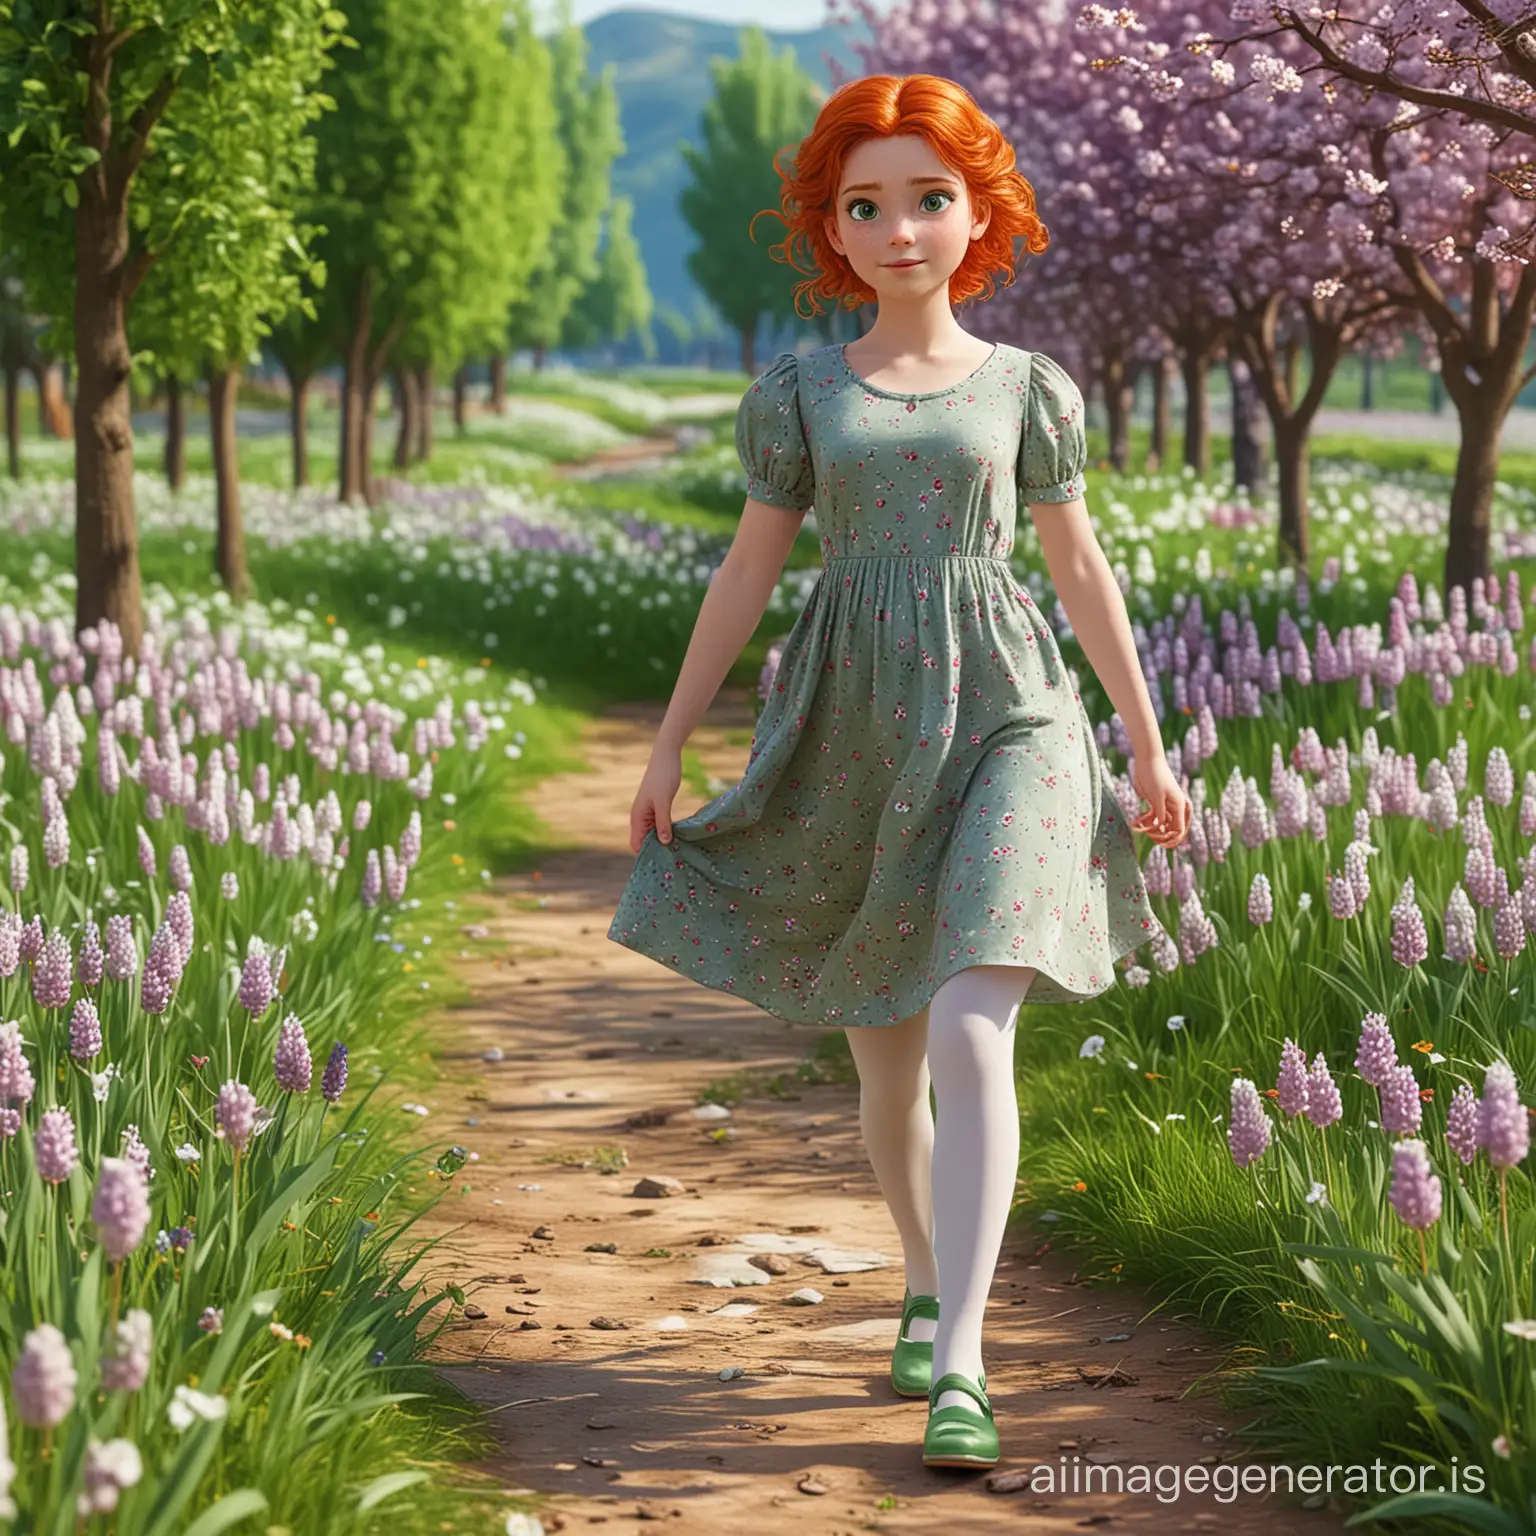 3d graphics: a spring landscape and a girl with green eyes, red hair dressed in a long green dress with short sleeves, white tights, purple shoes